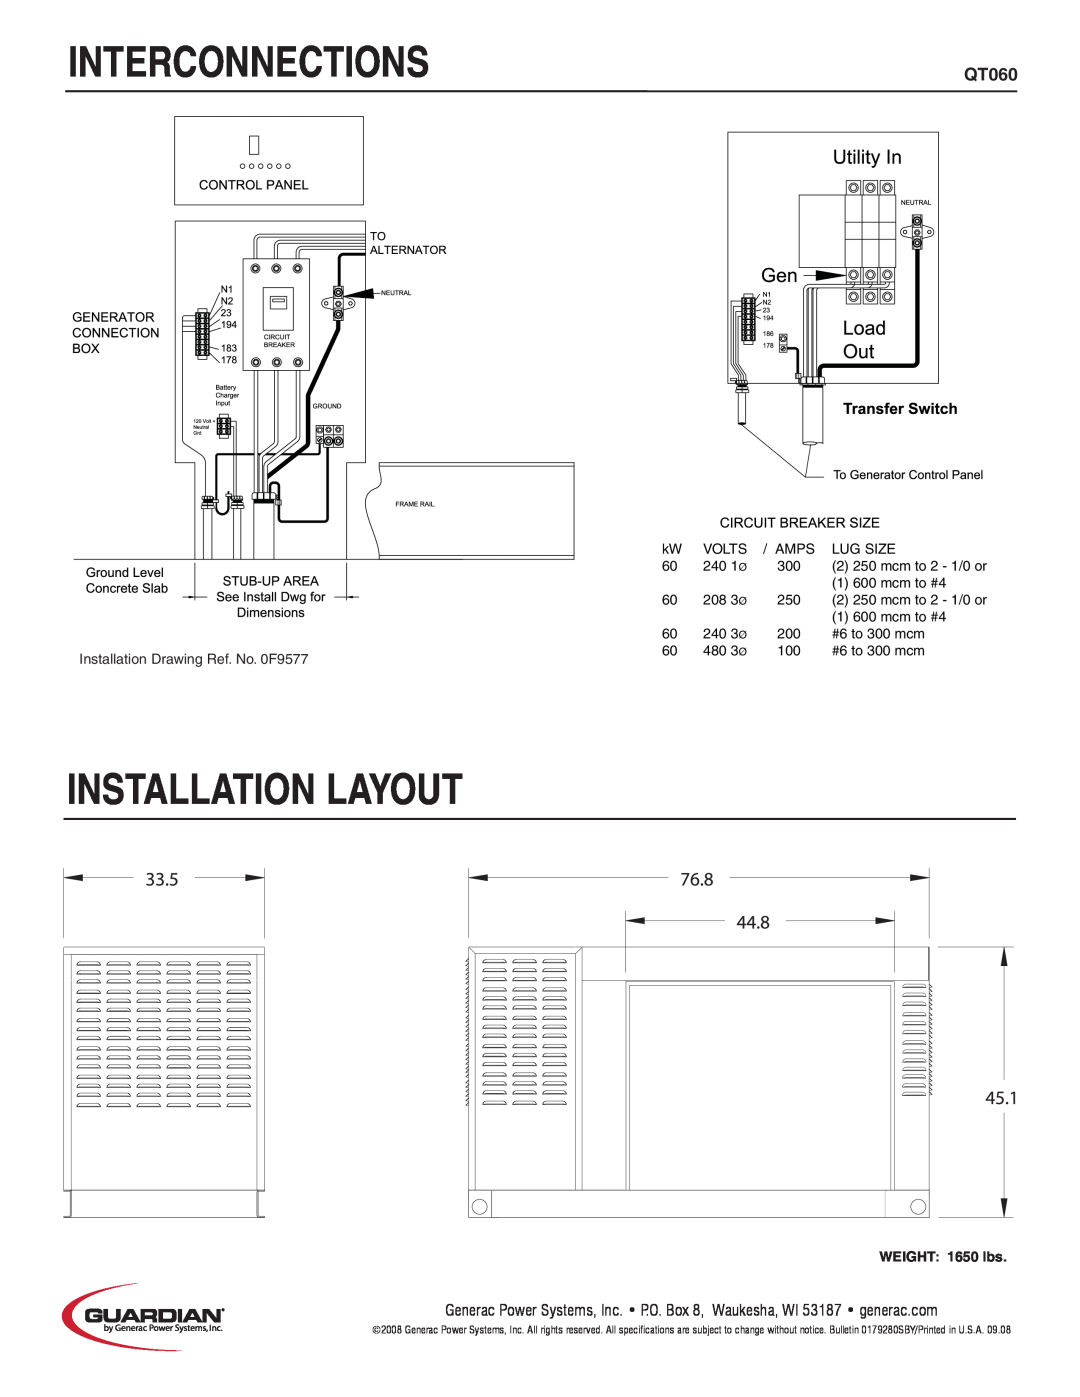 Guardian Technologies QT060 manual Interconnections, Installation Layout, WEIGHT 1650 lbs 